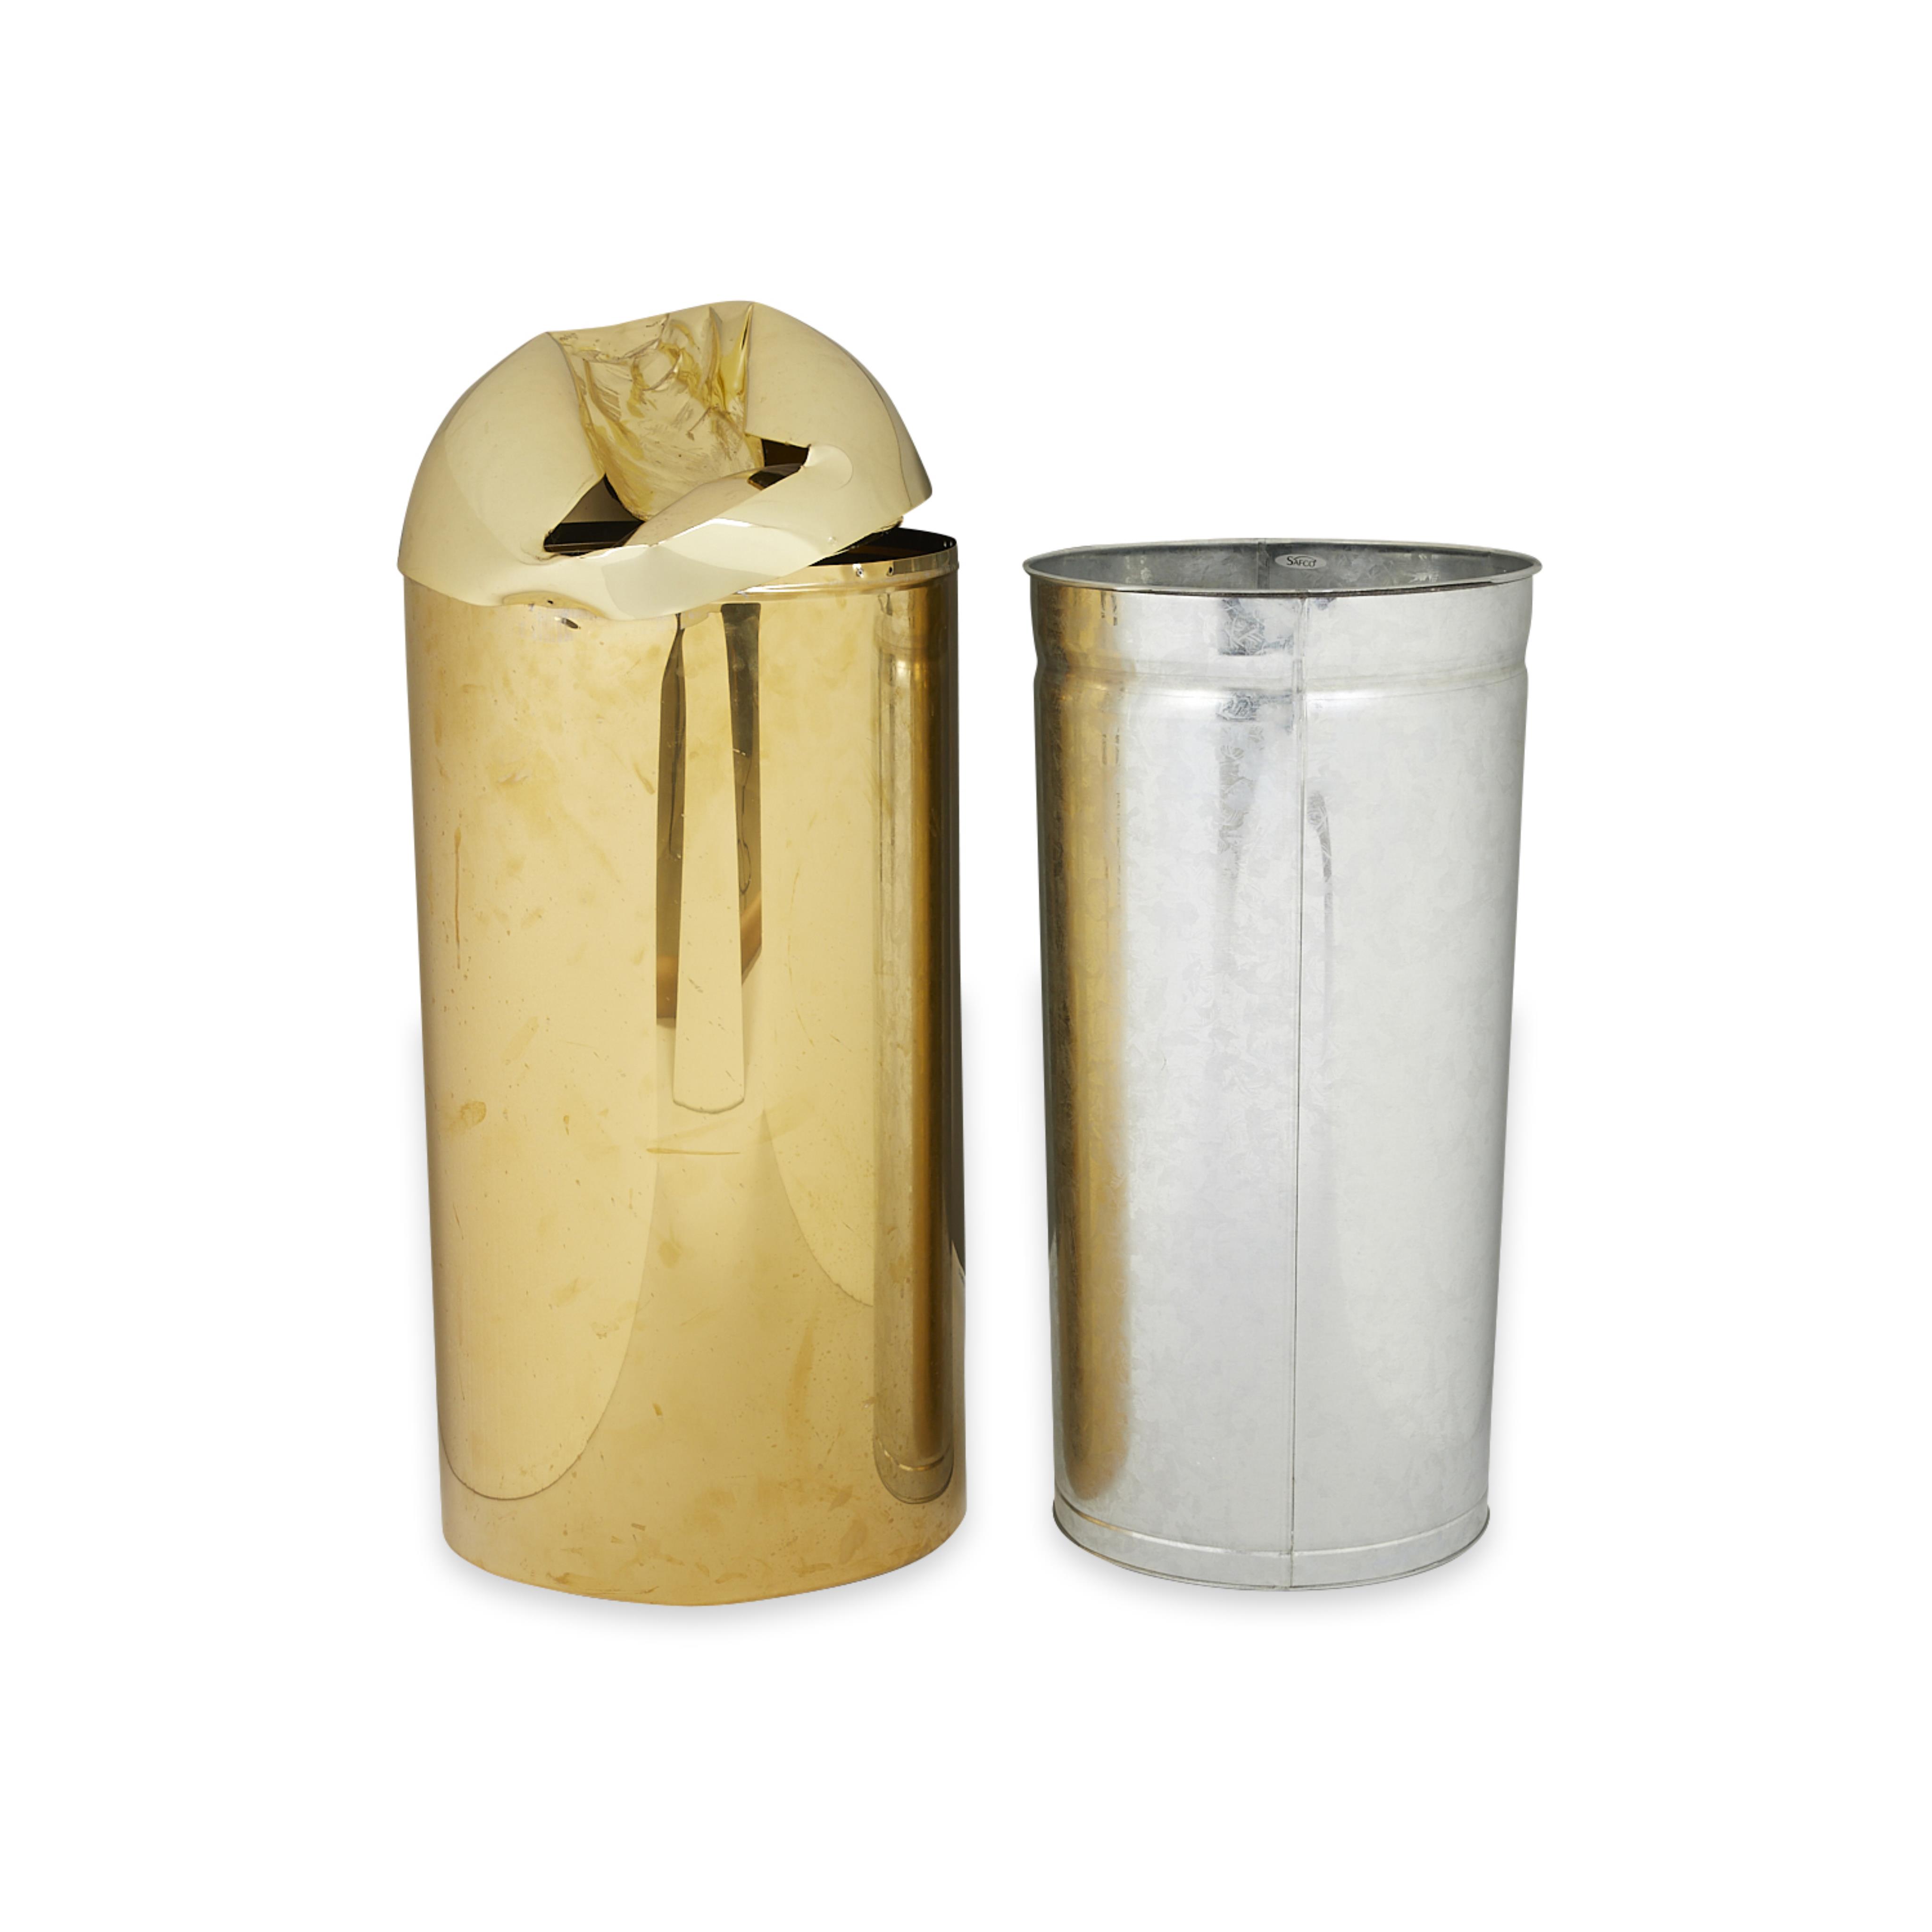 Joe Smith Gold-Tone Garbage Can 2008 - Image 9 of 12